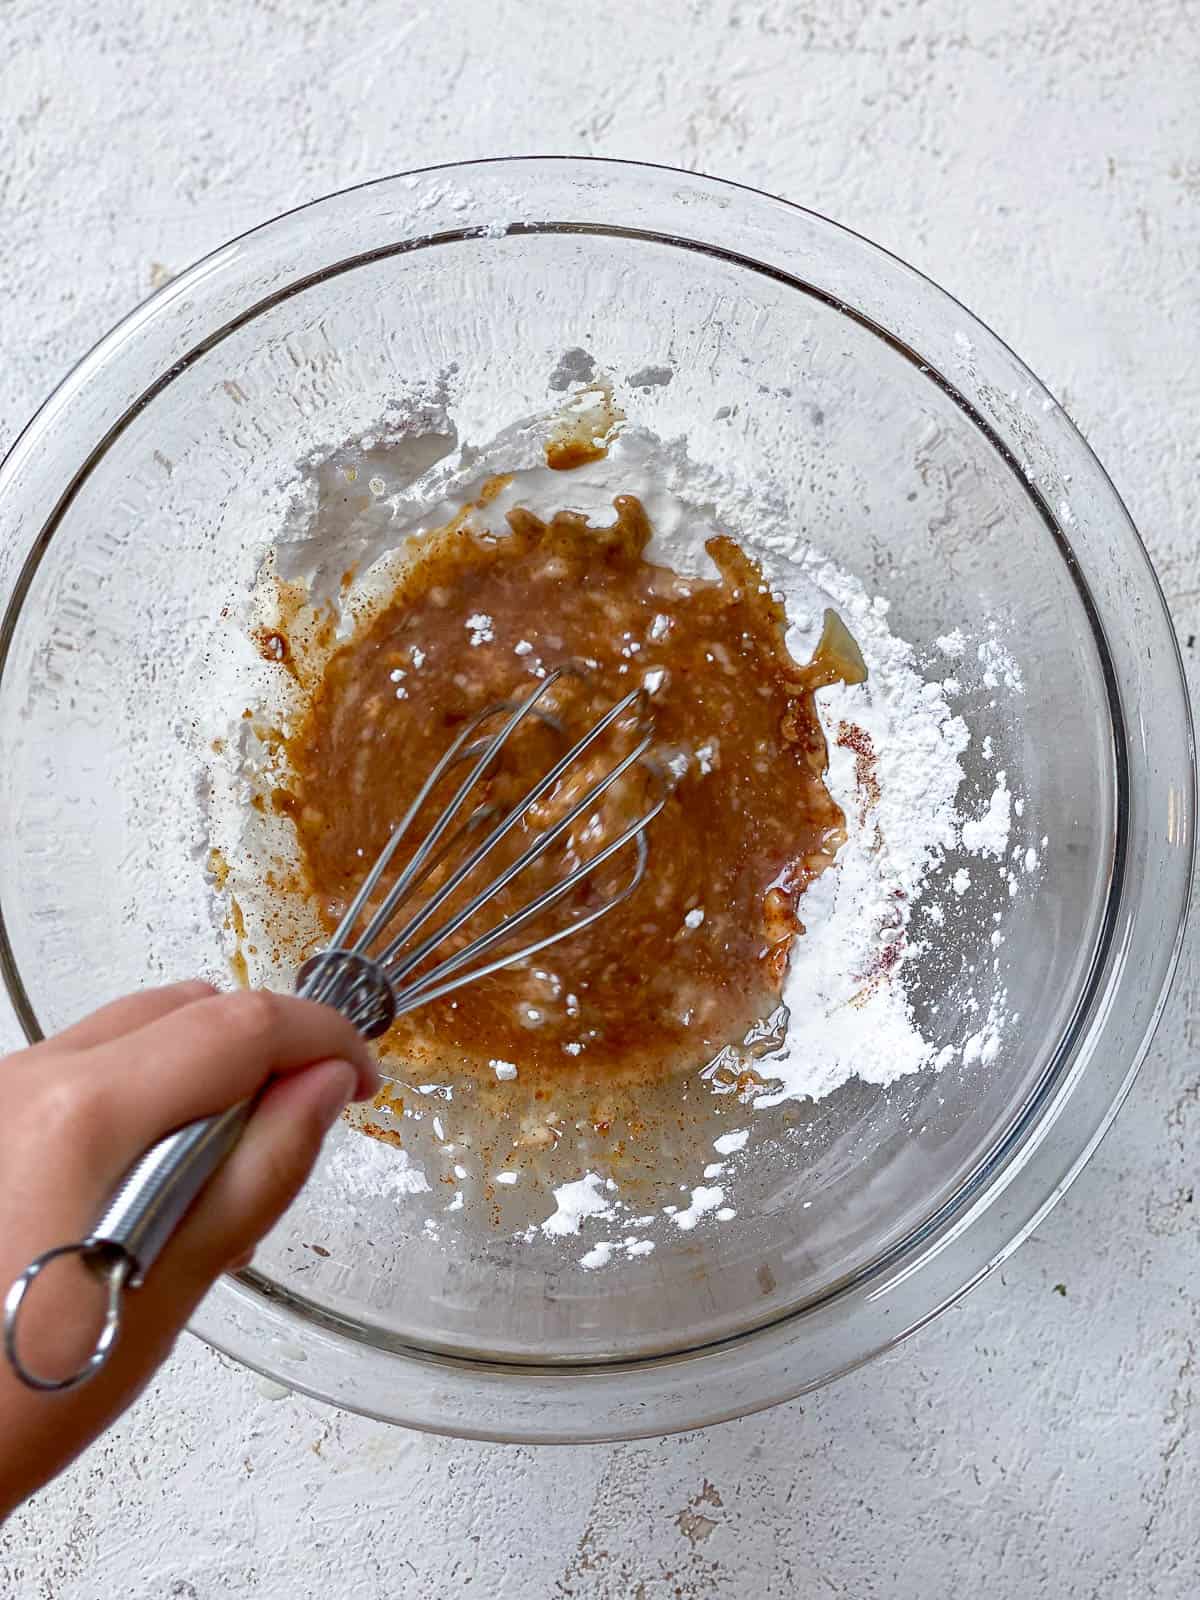 Whisking together soy sauce, cornstarch, and seasonings